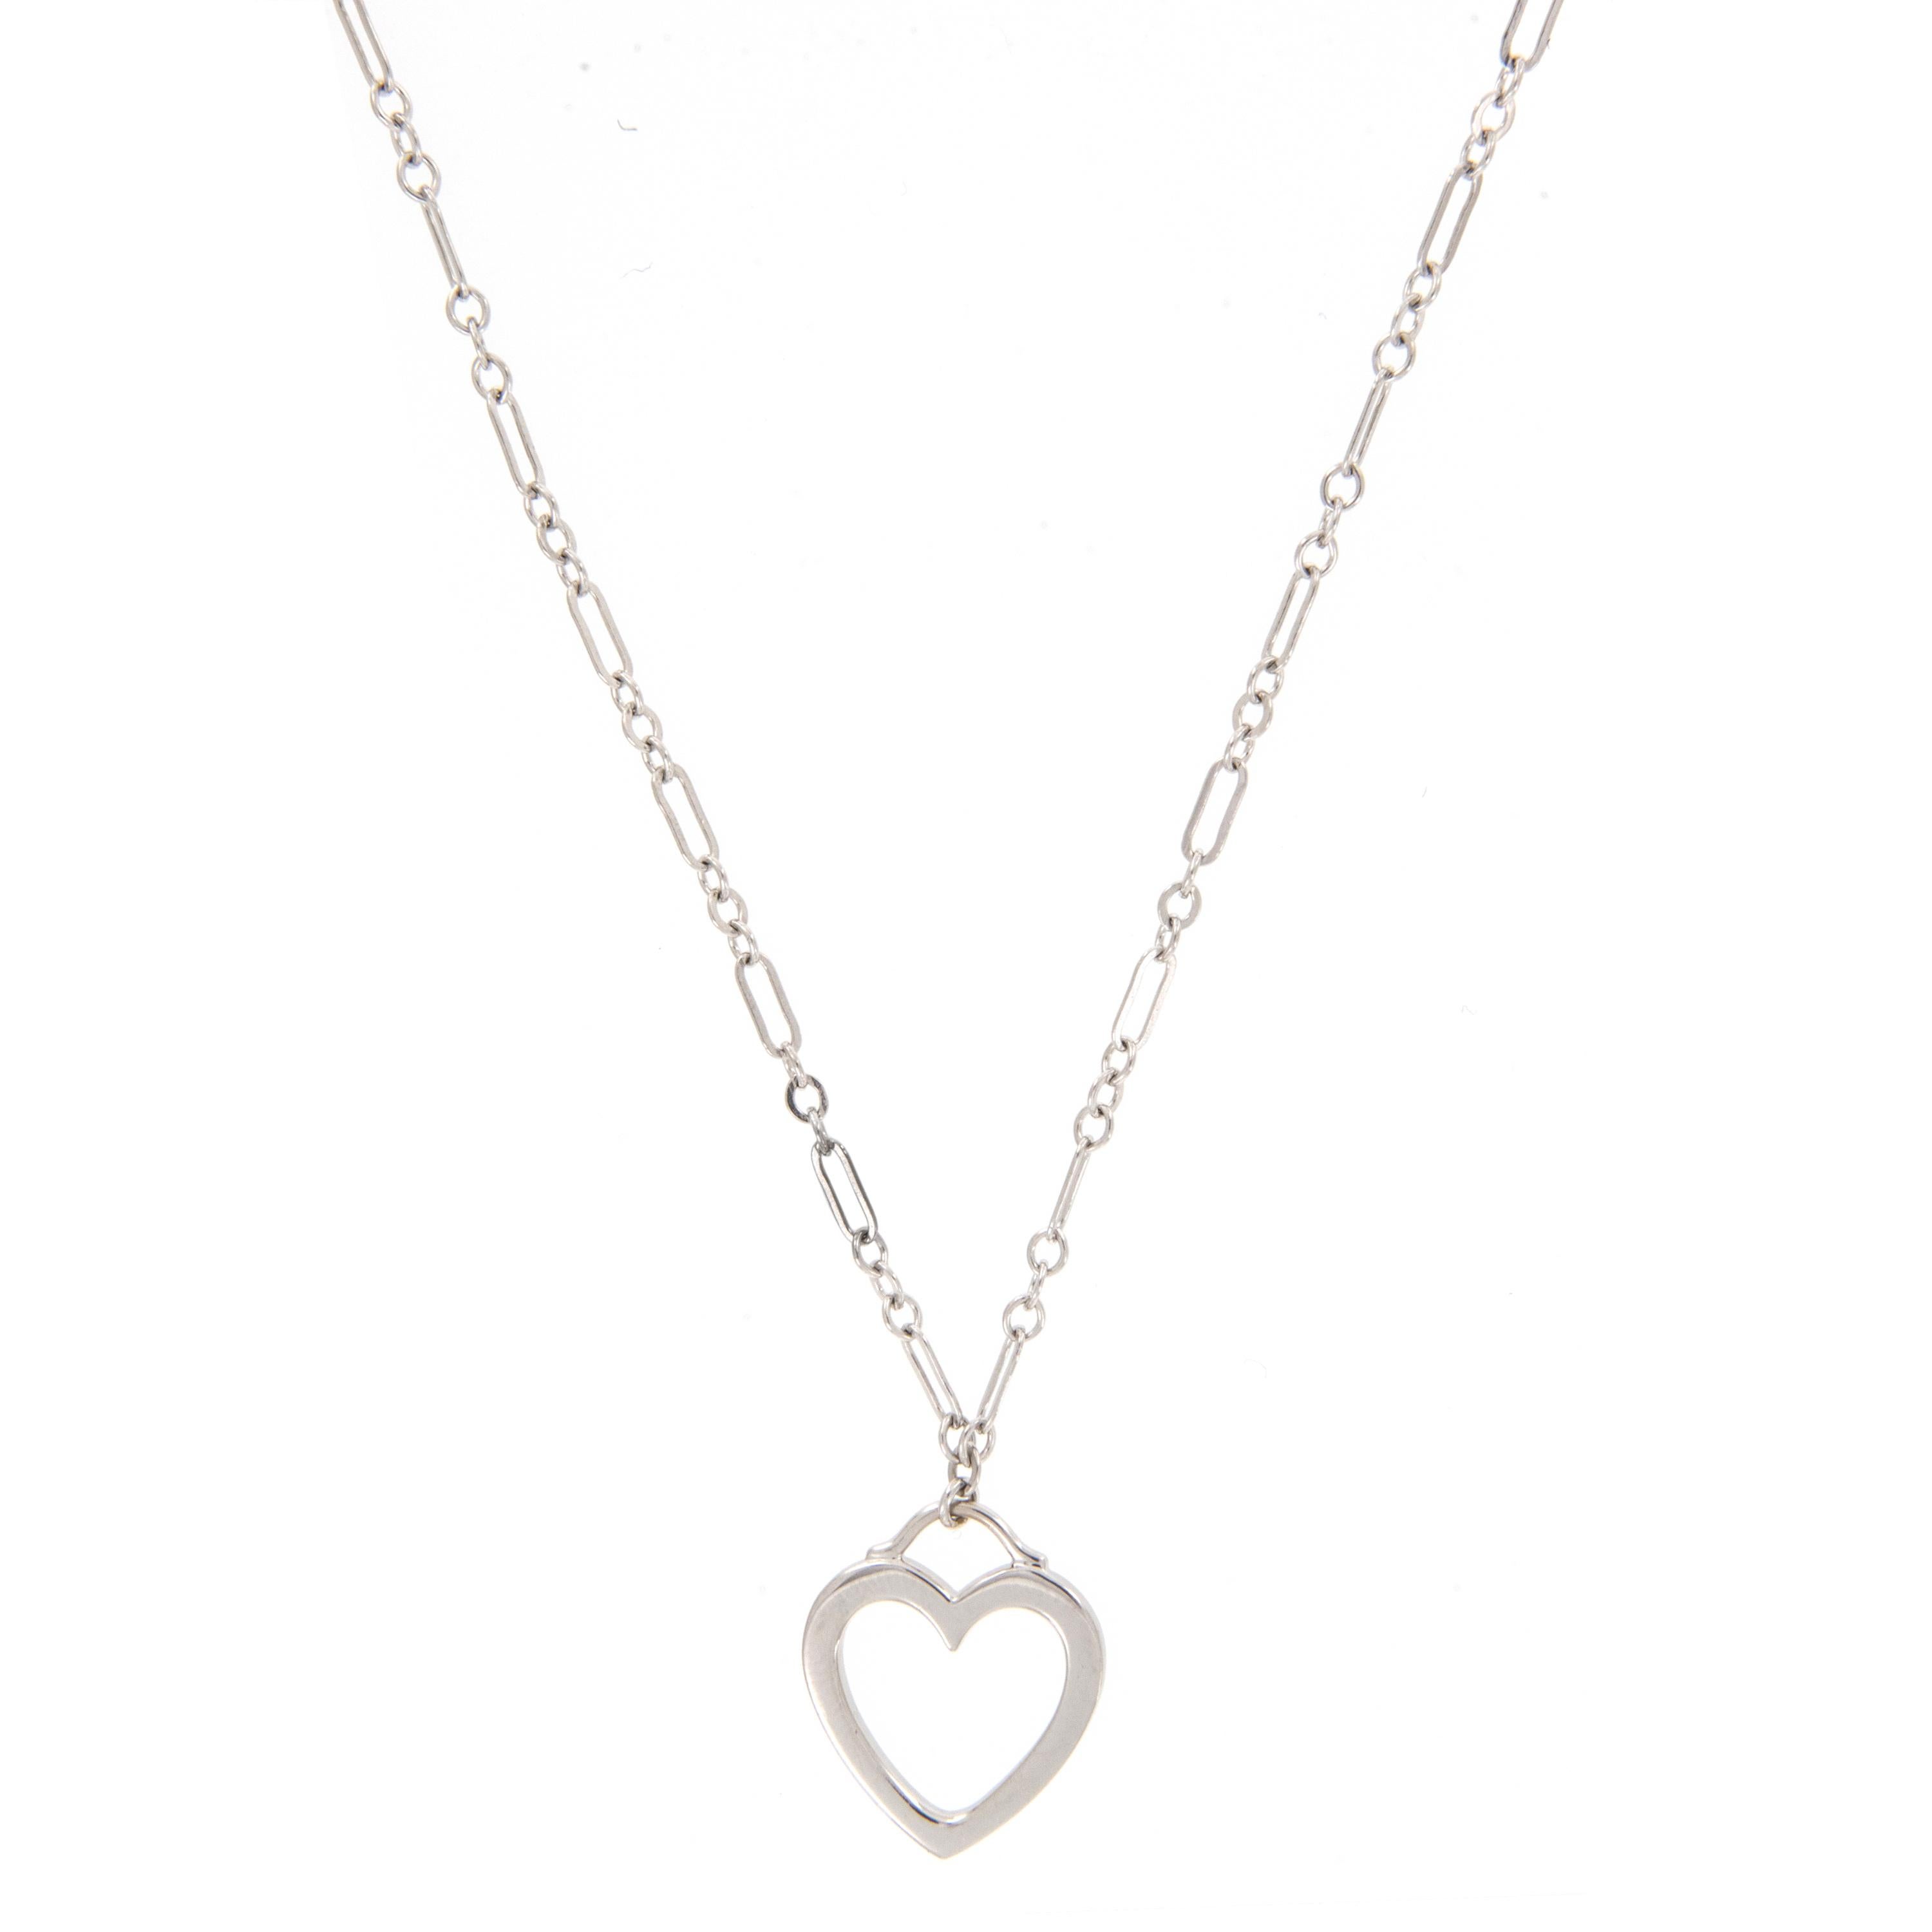 Rare & Vintage- this small 18 karat white gold Tiffany & Co open heart necklace with fancy link chain is  15.25